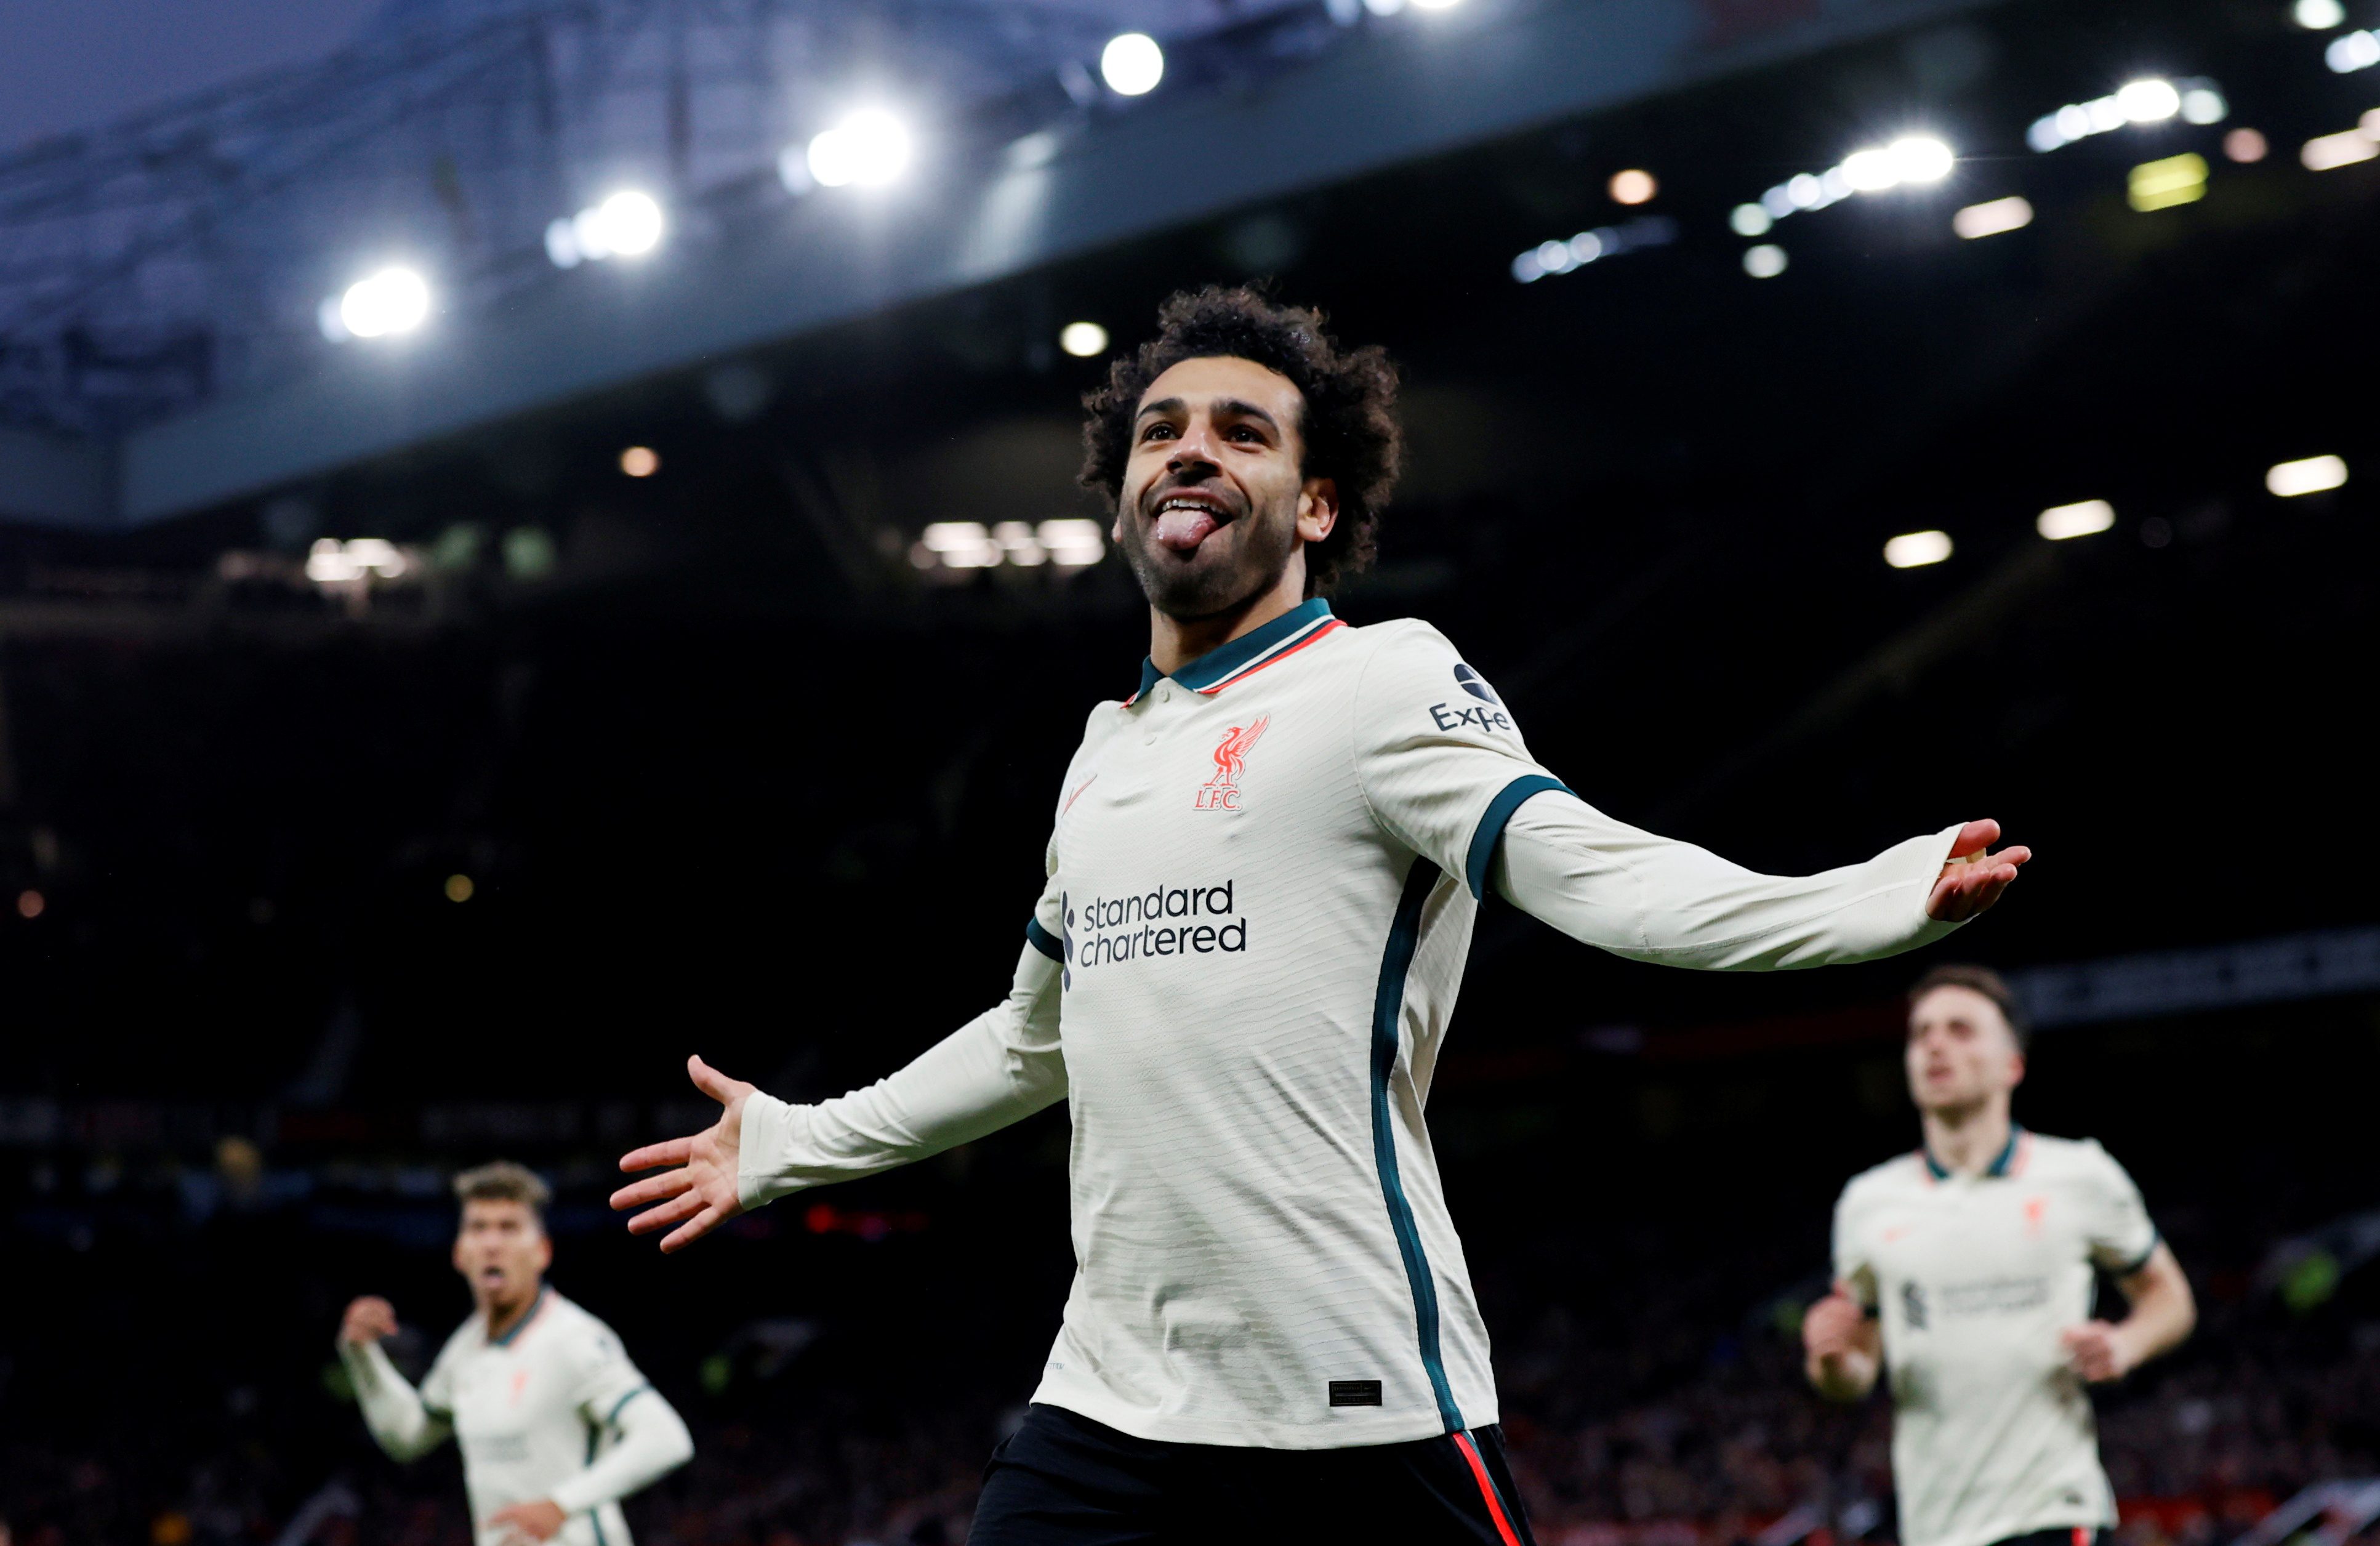 Liverpool calls 5-0 win at United an ‘insane result’